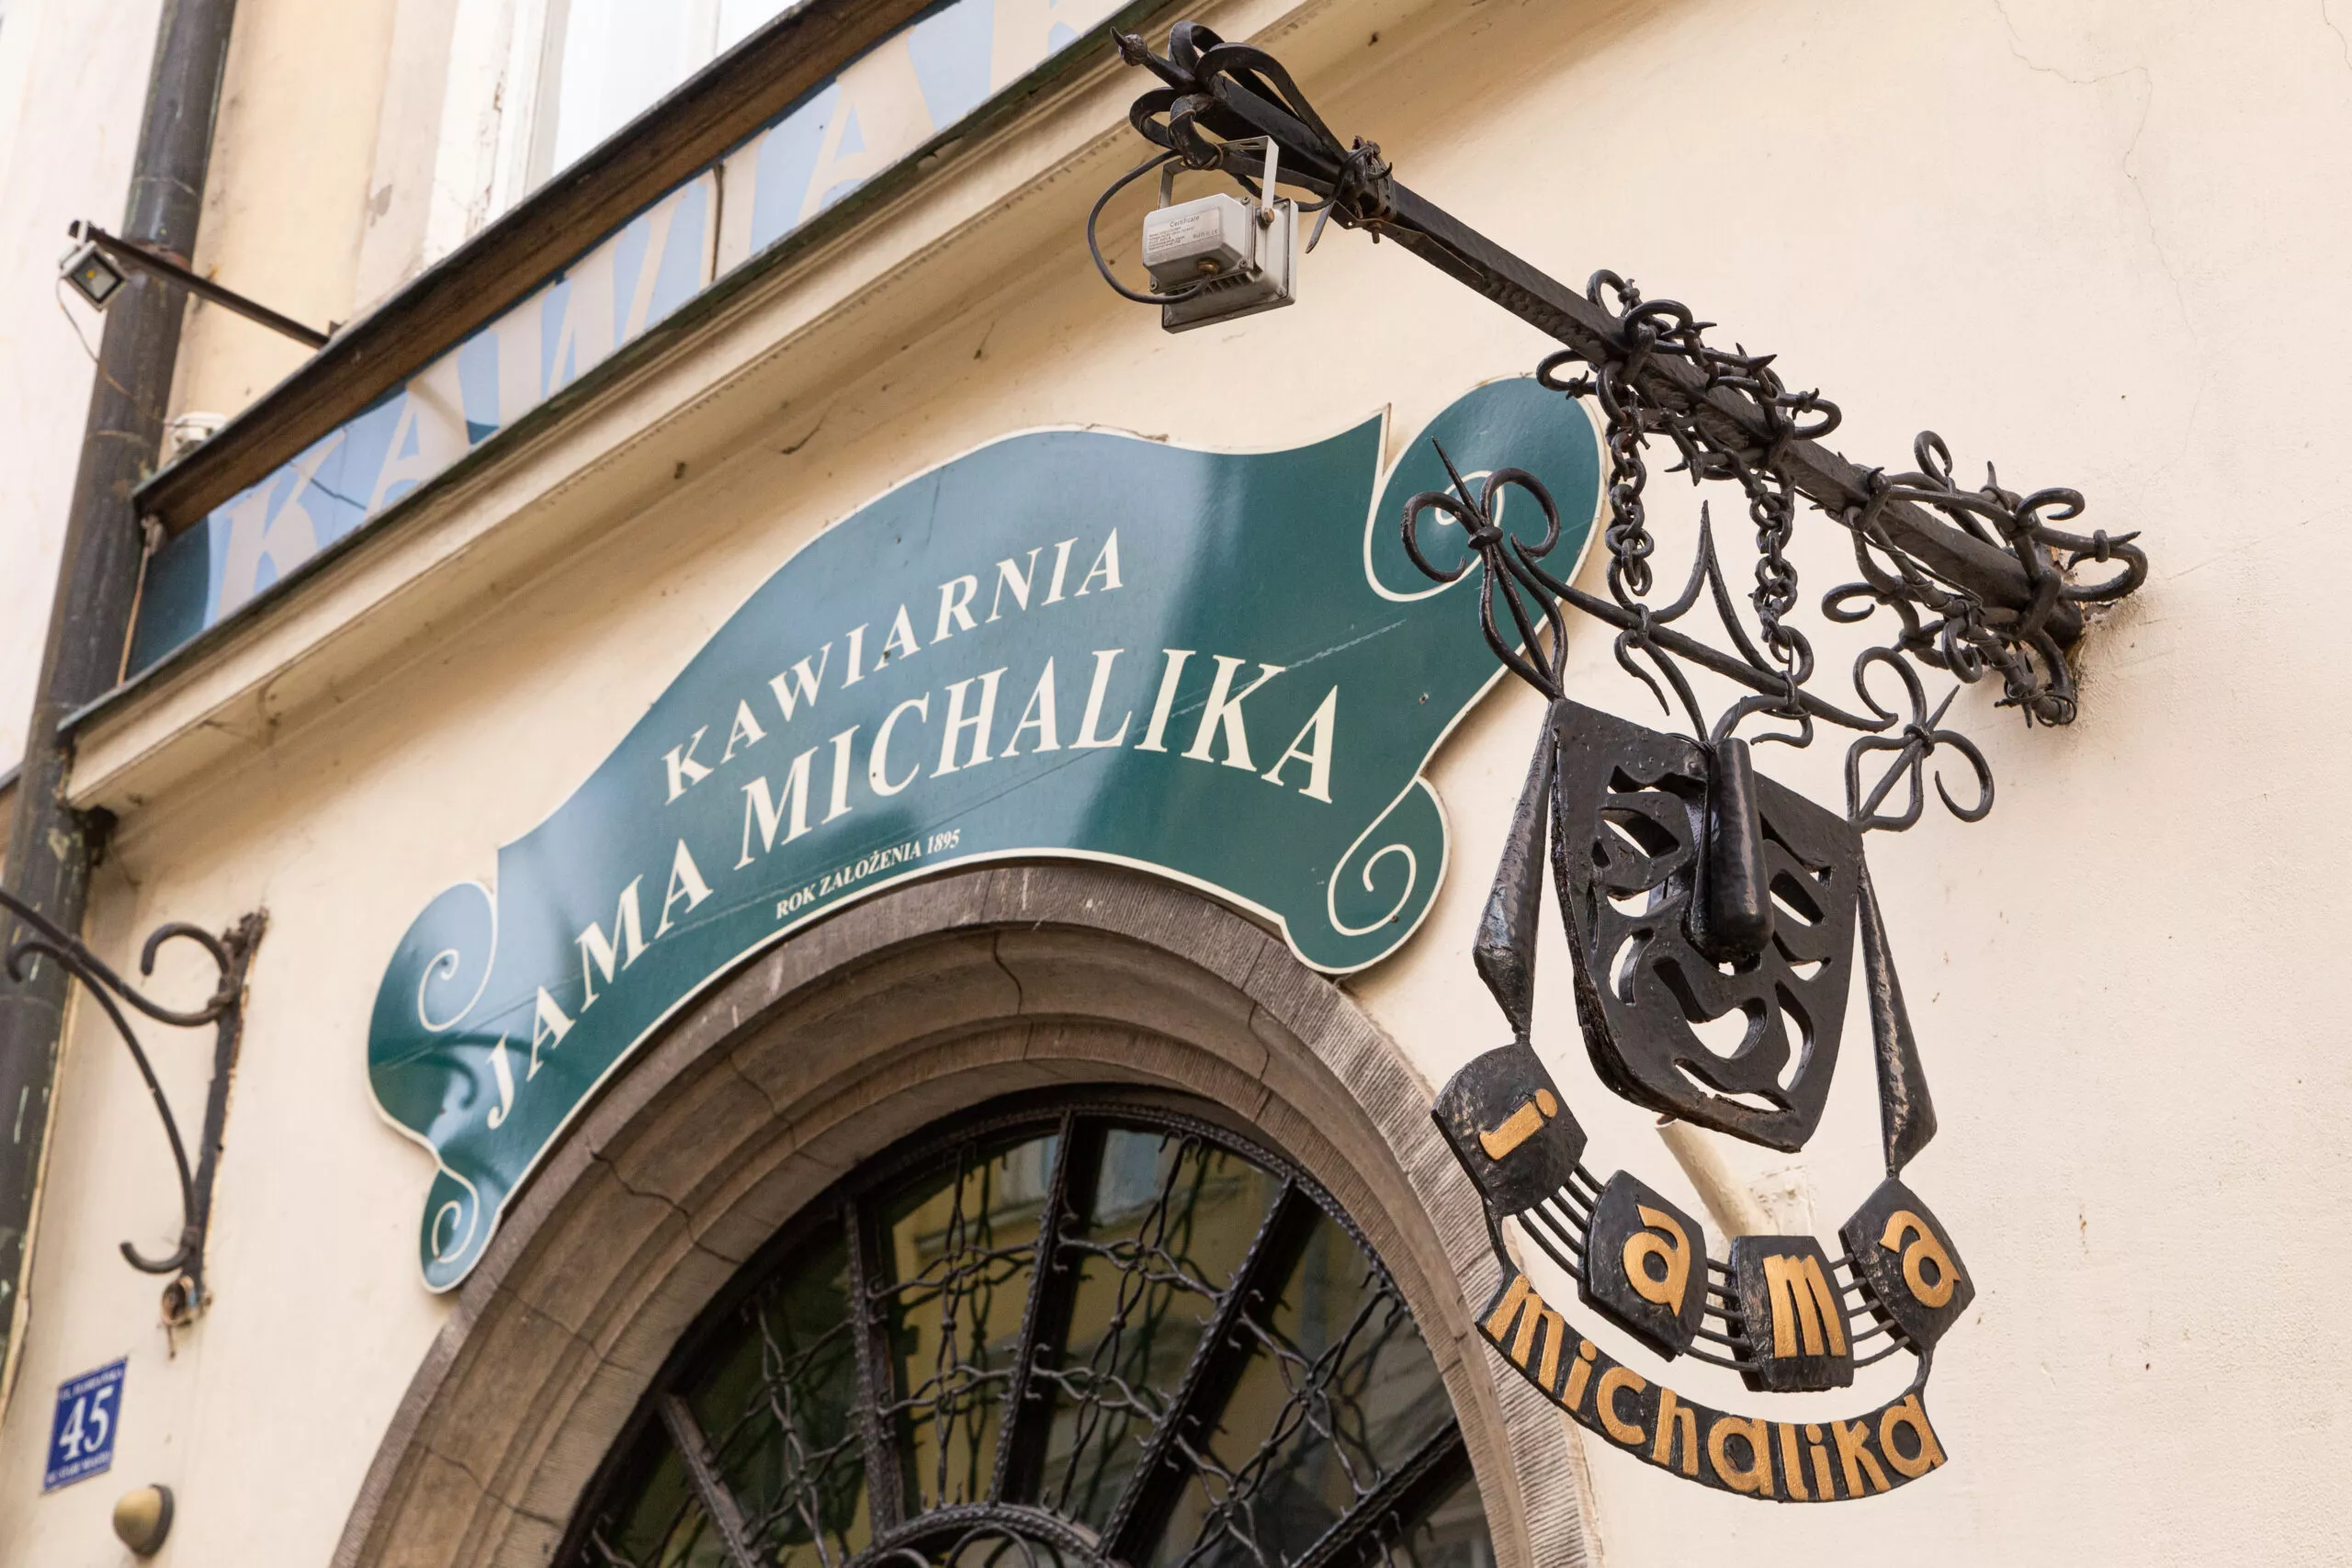 A small section of a townhouse façade with a fancy green sign reading “Kawiarnia Jama Michalika” fixed above the top of a gate, next to an elaborated metal café sign hanging from a rod.